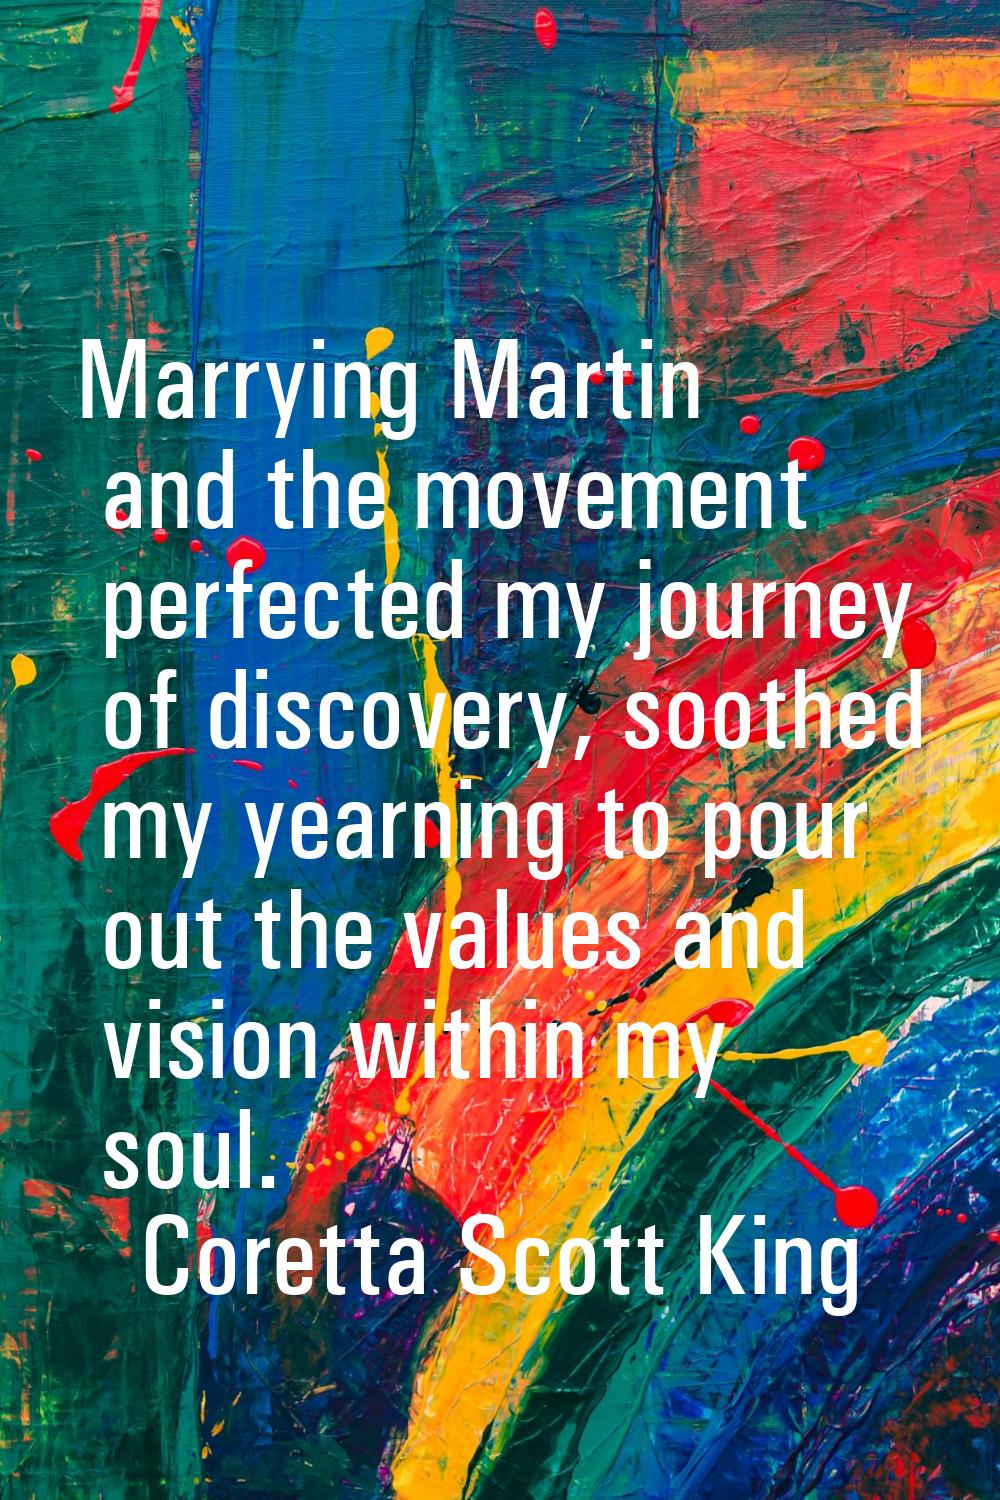 Marrying Martin and the movement perfected my journey of discovery, soothed my yearning to pour out